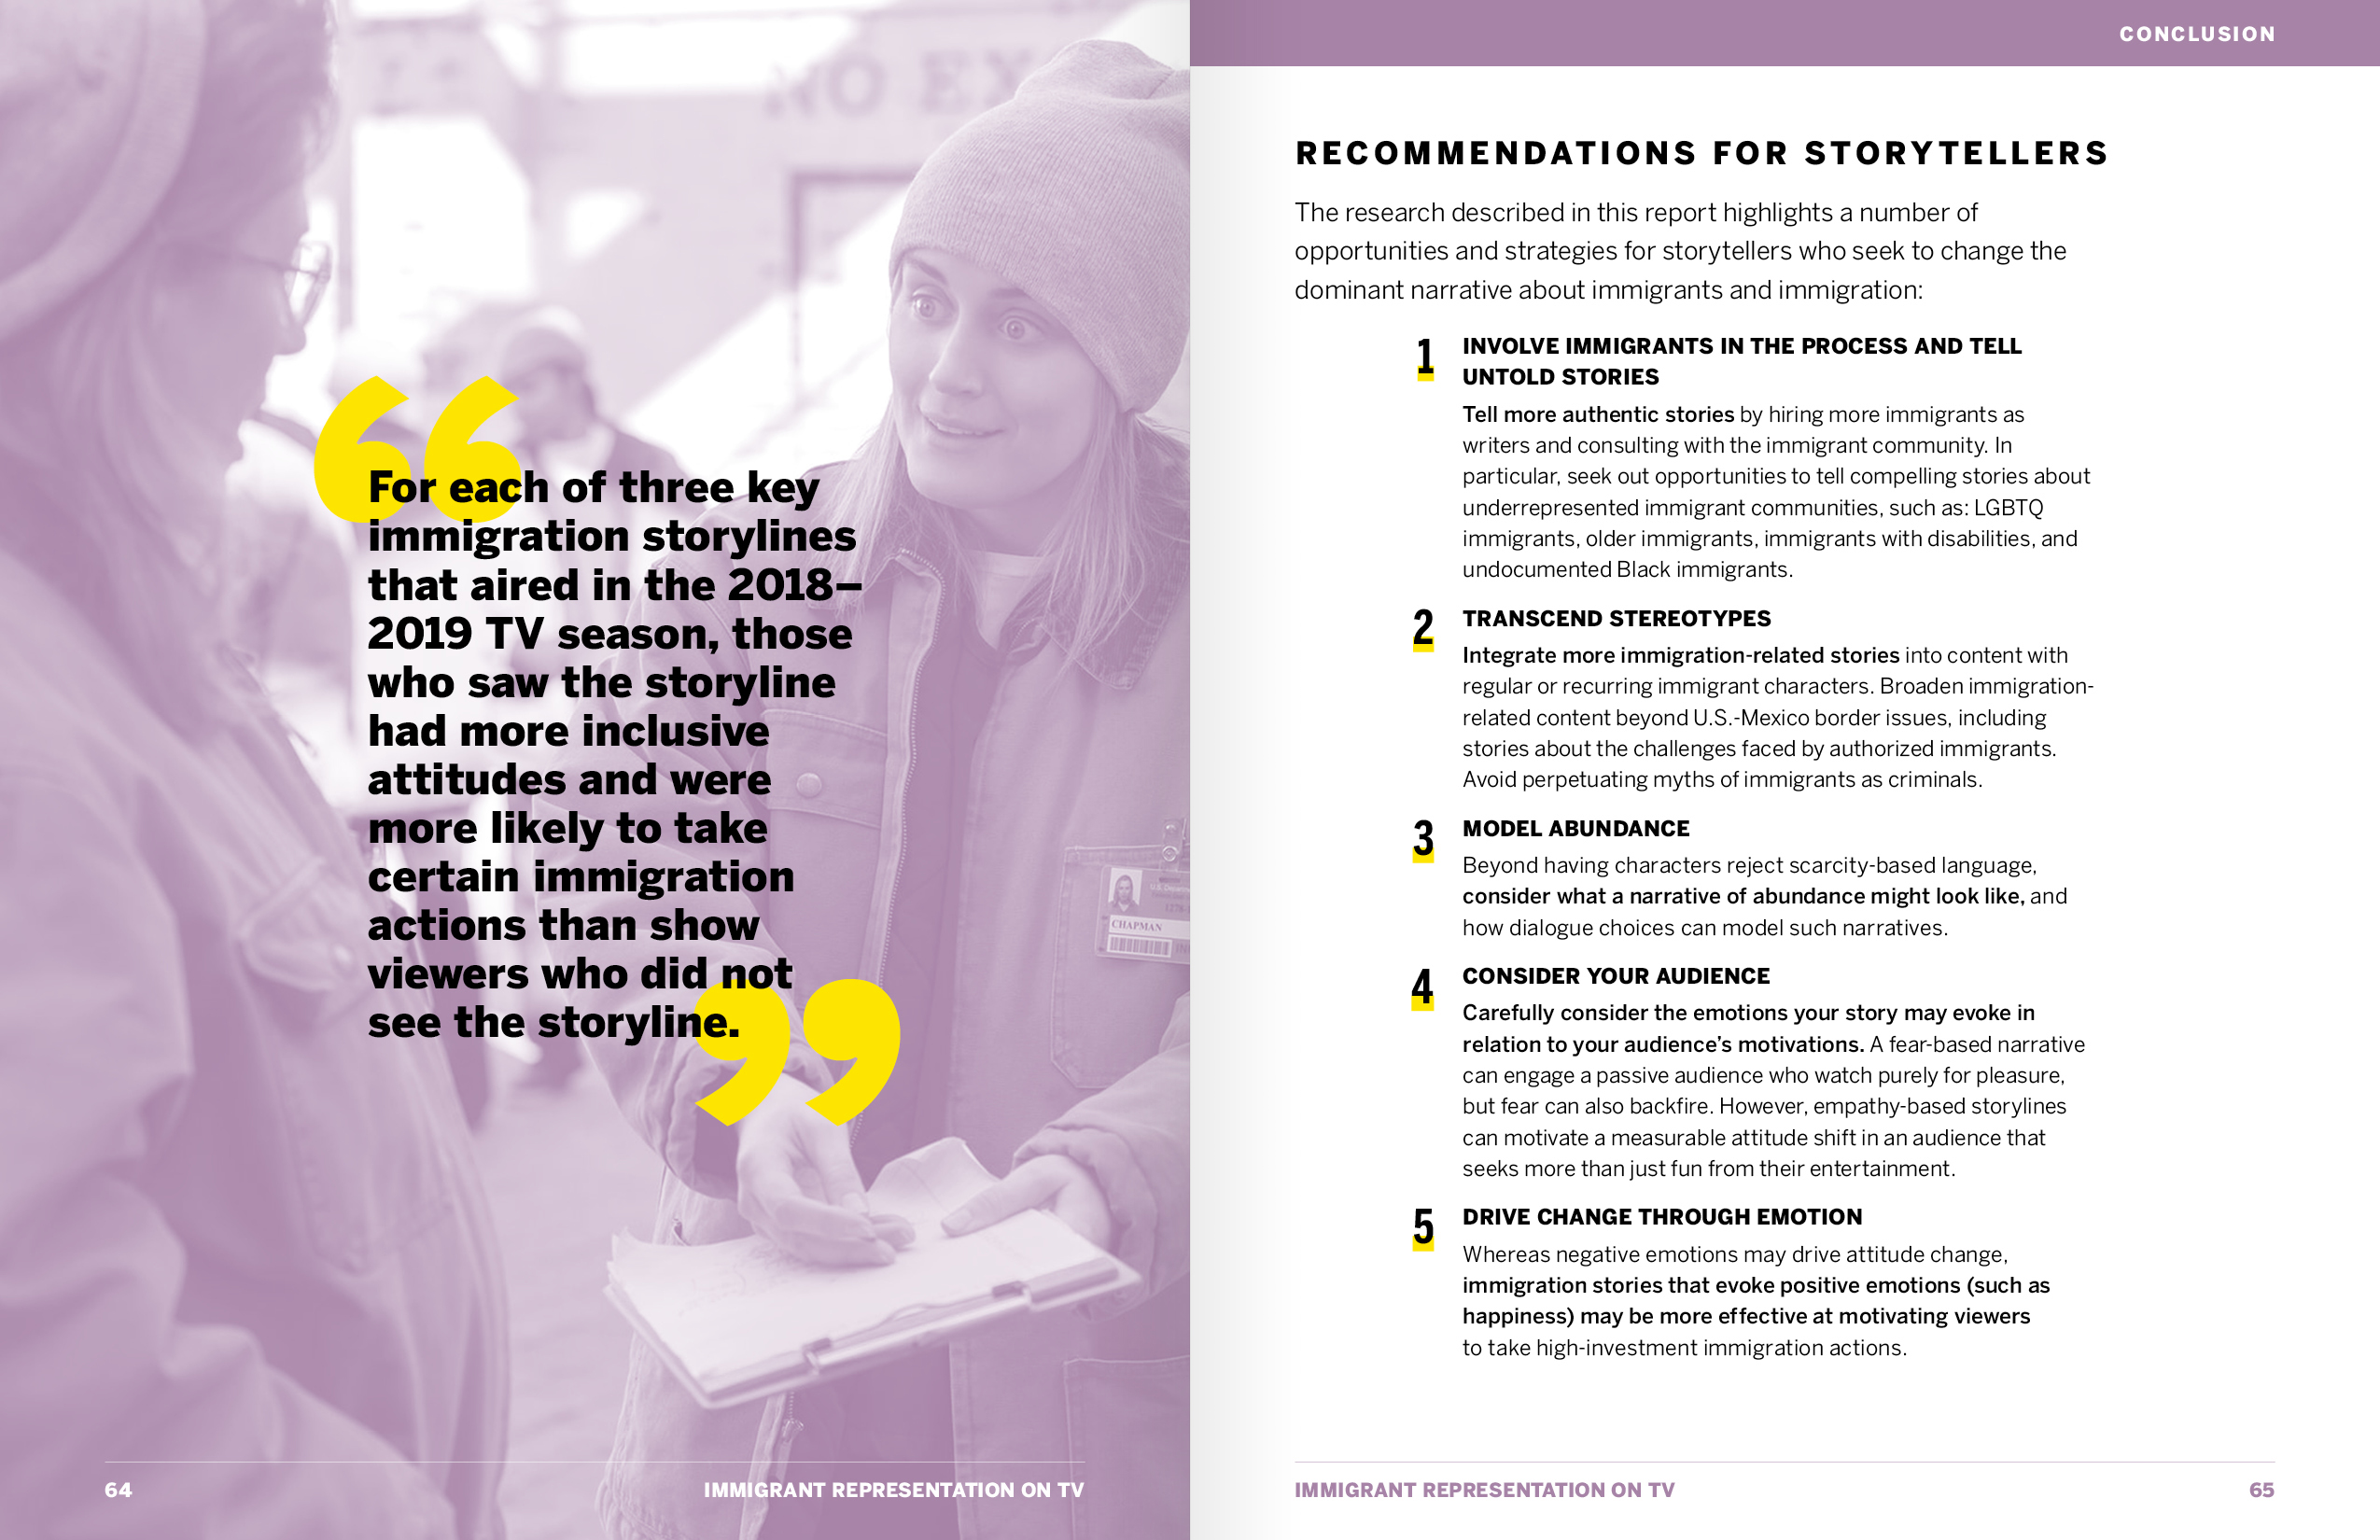 A spread from the Recommendations for Storytellers section of the report.